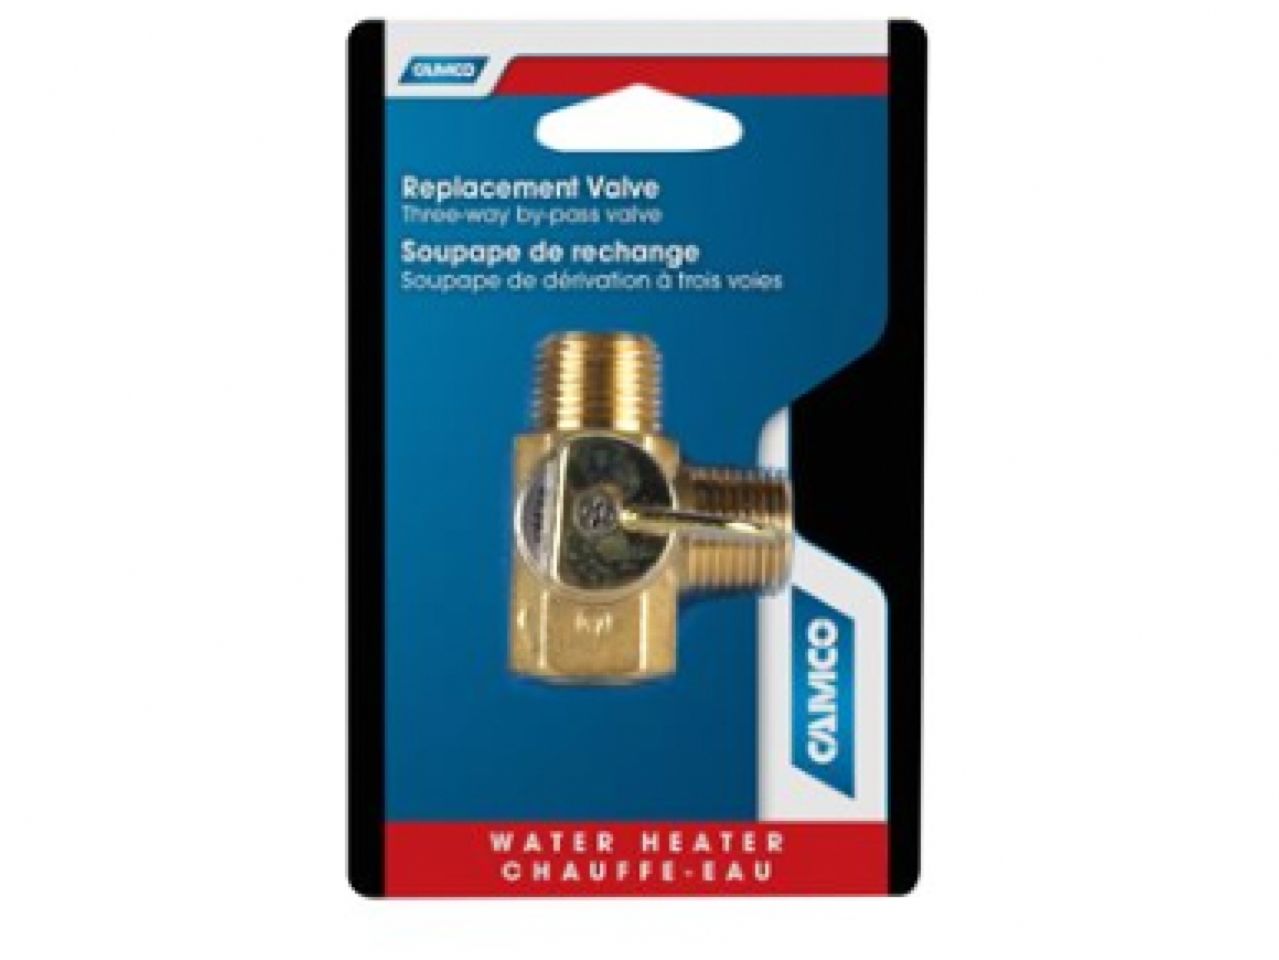 Camco 3-Way By-Pass Valve replacement - Repalcement Valve